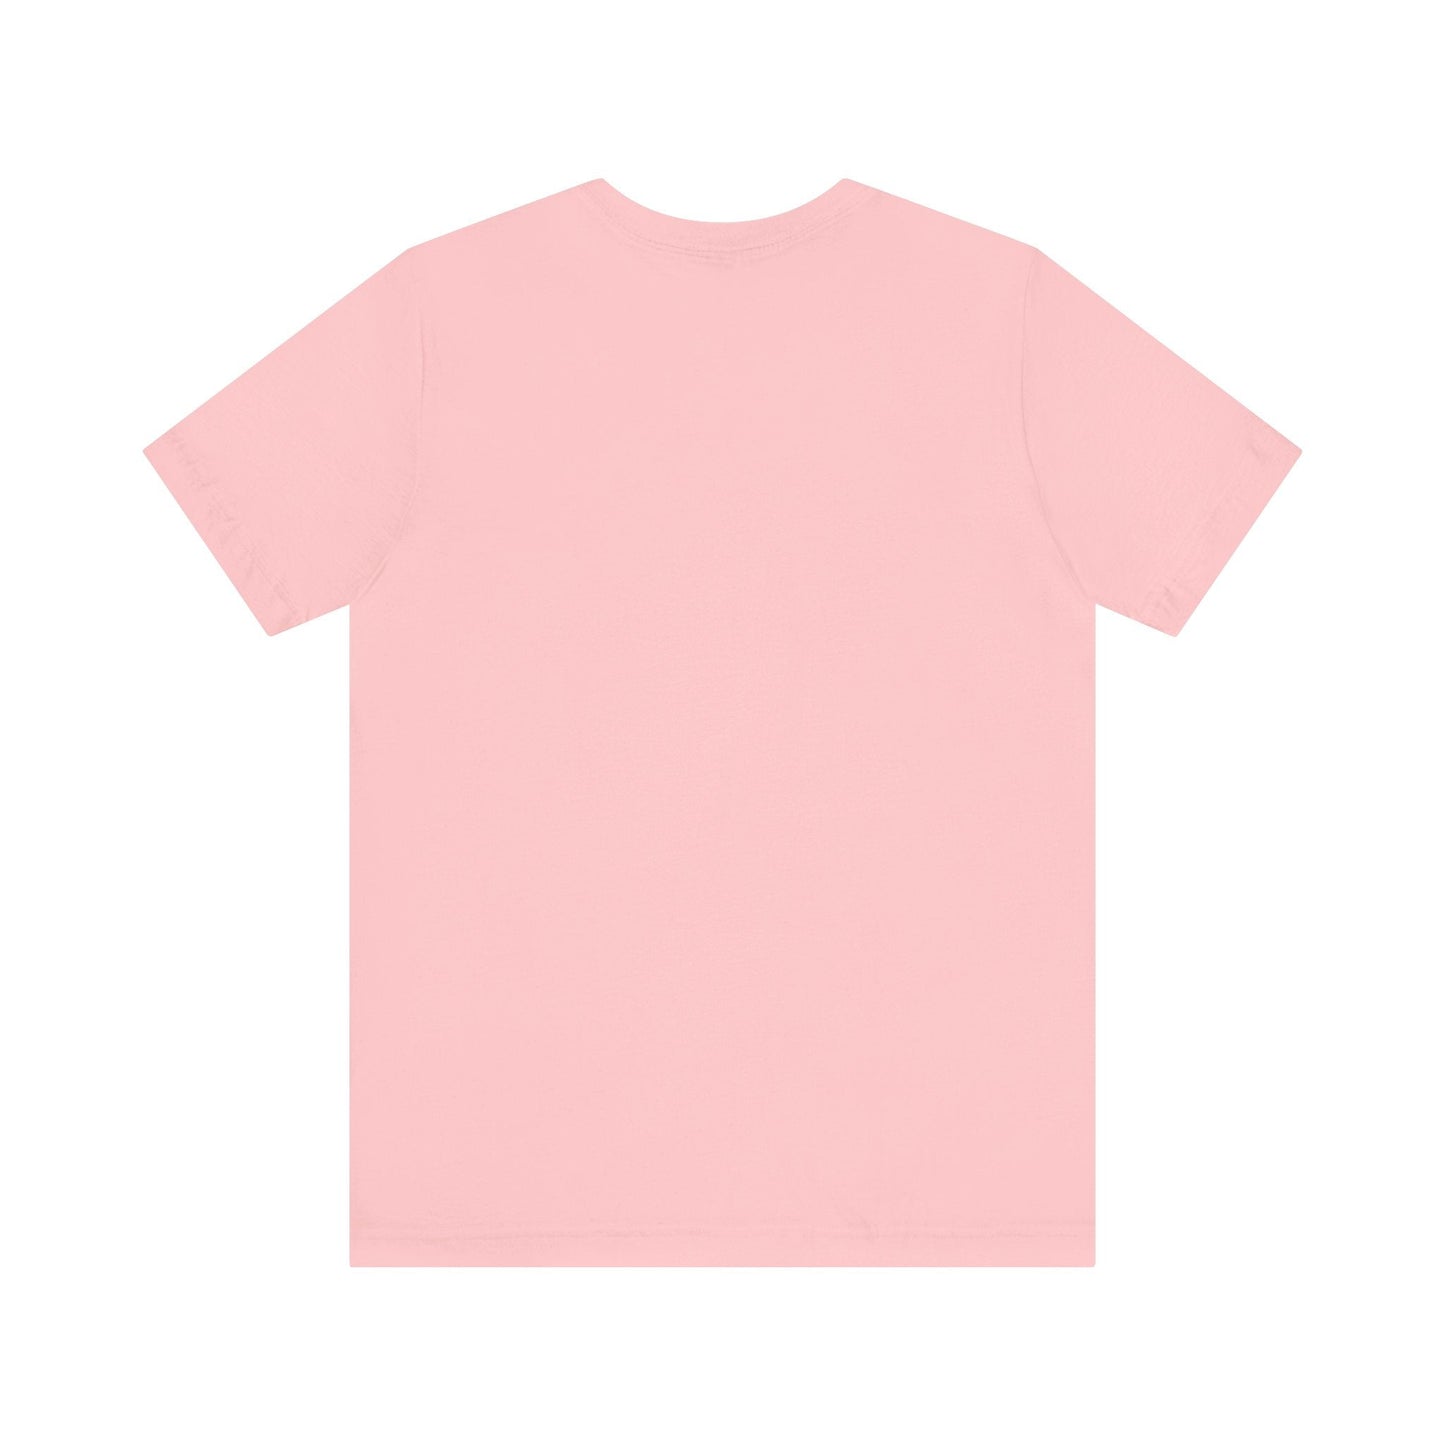 Bark For Bobby Unisex Tee Pink - TEAM KENNEDY. All rights reserved